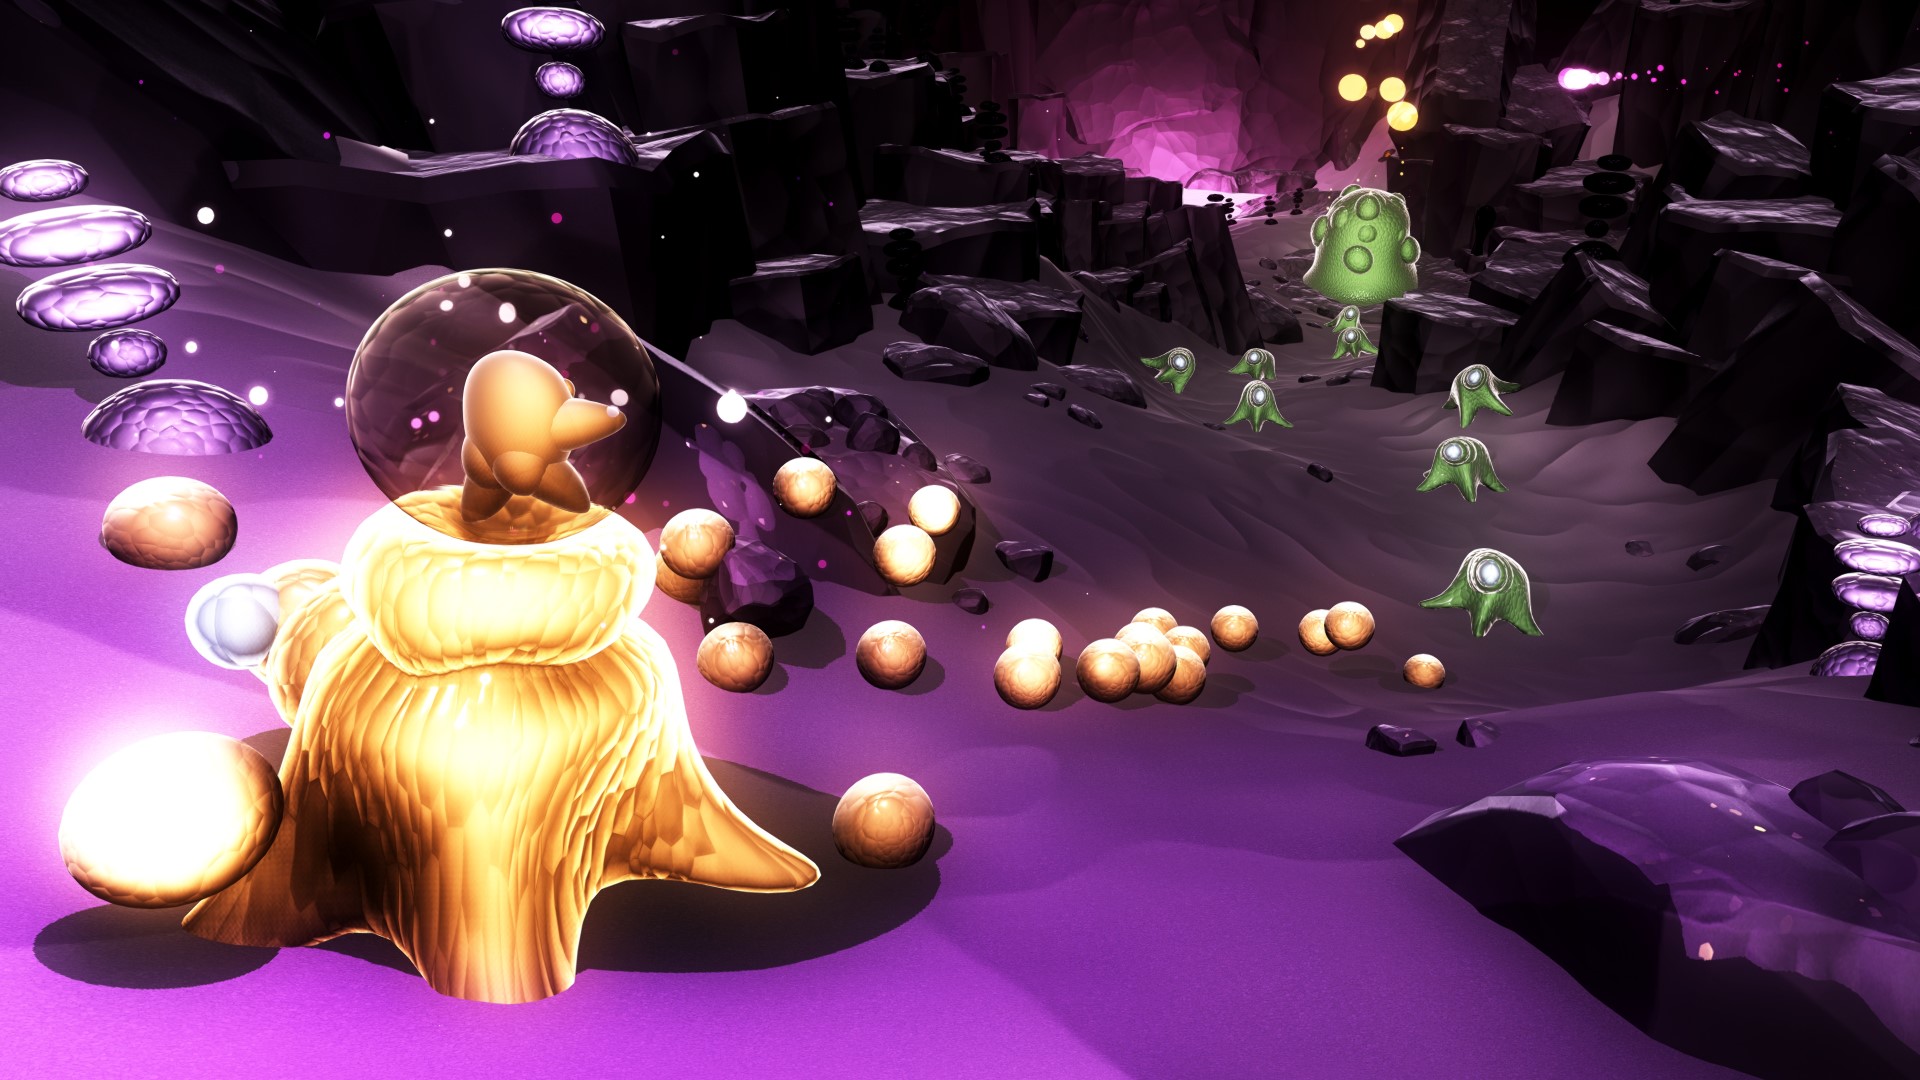 Ode is a new ‘music exploration adventure’ from the makers of Grow Home